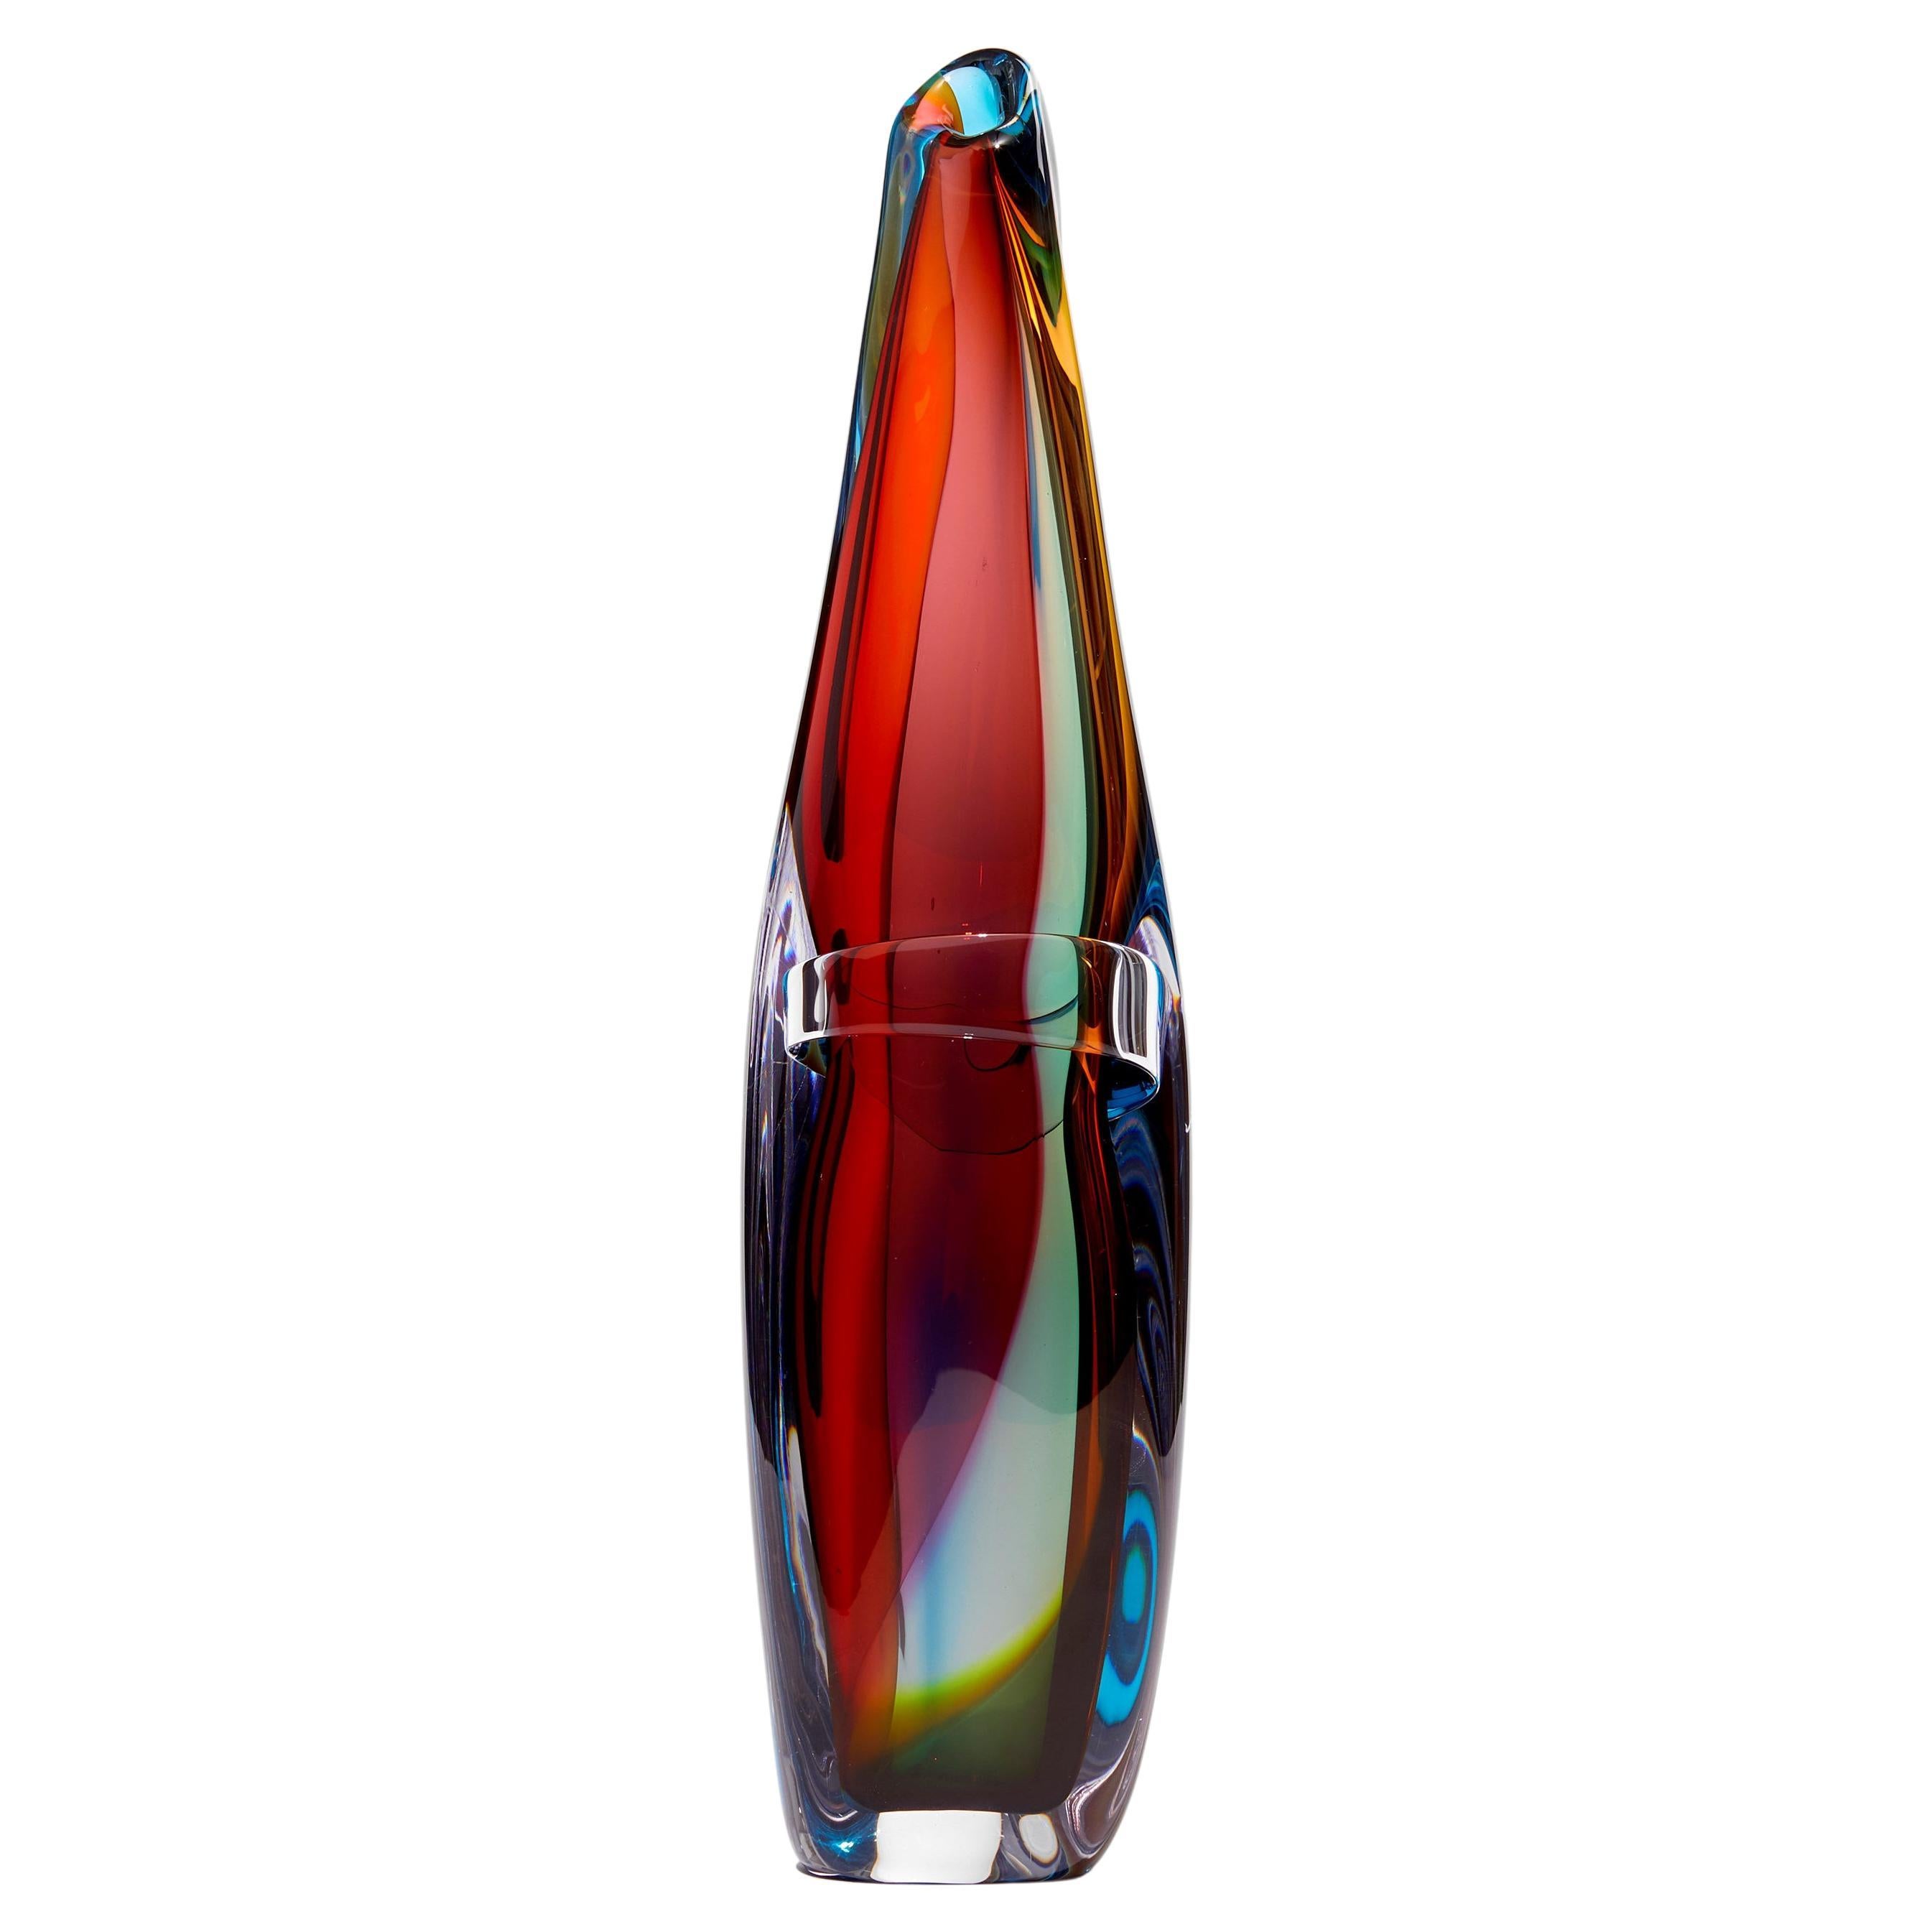 Tricolarial 50, a Unique Red, Purple, Blue & Green Glass Vase by Vic Bamforth